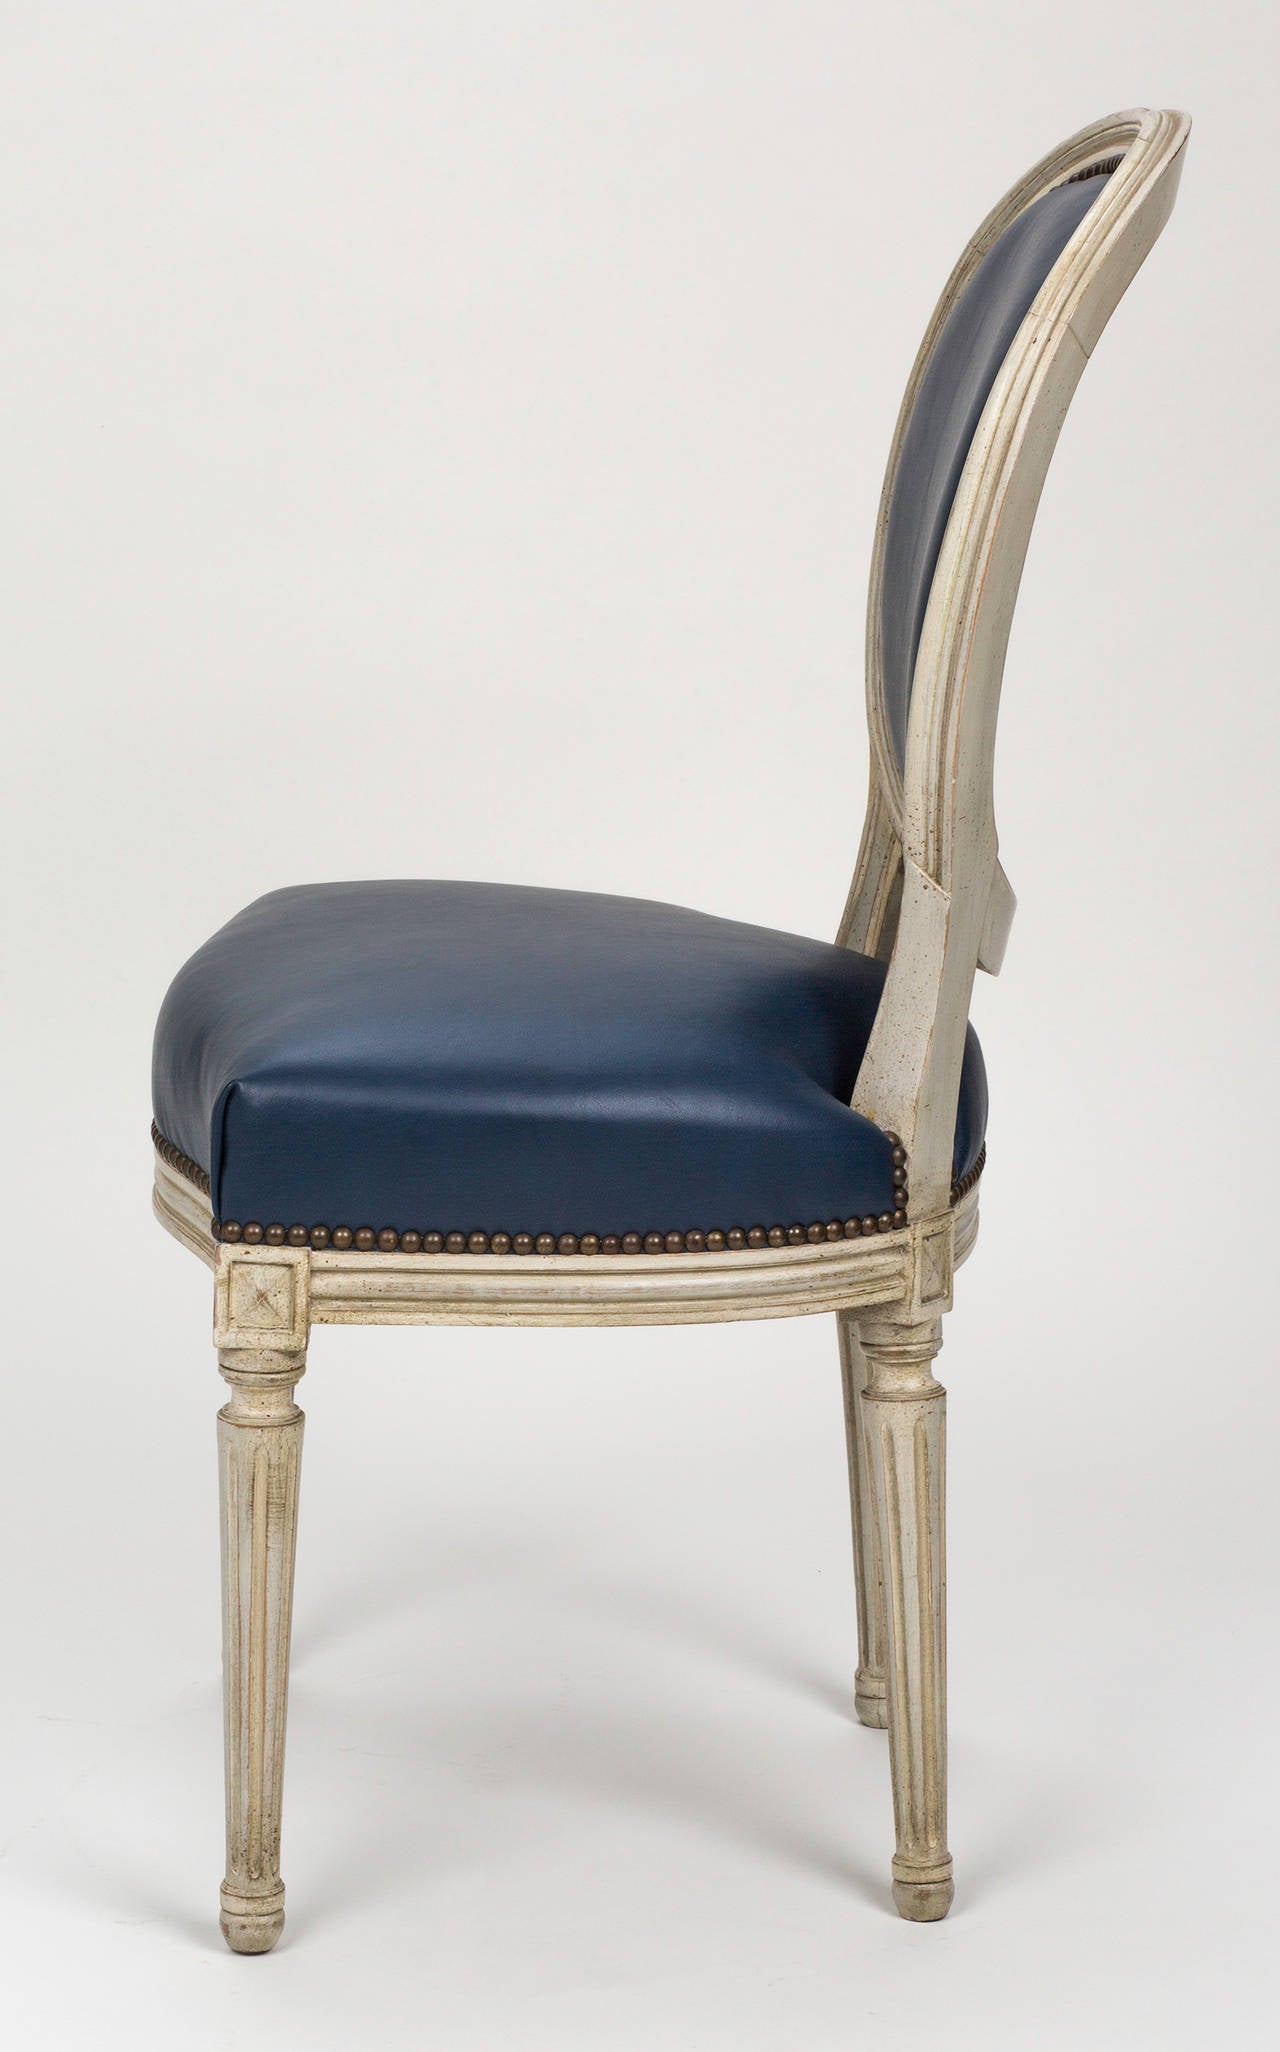 Late 19th Century Pair of French Louis XVI Style Leather Chairs, circa 1880s